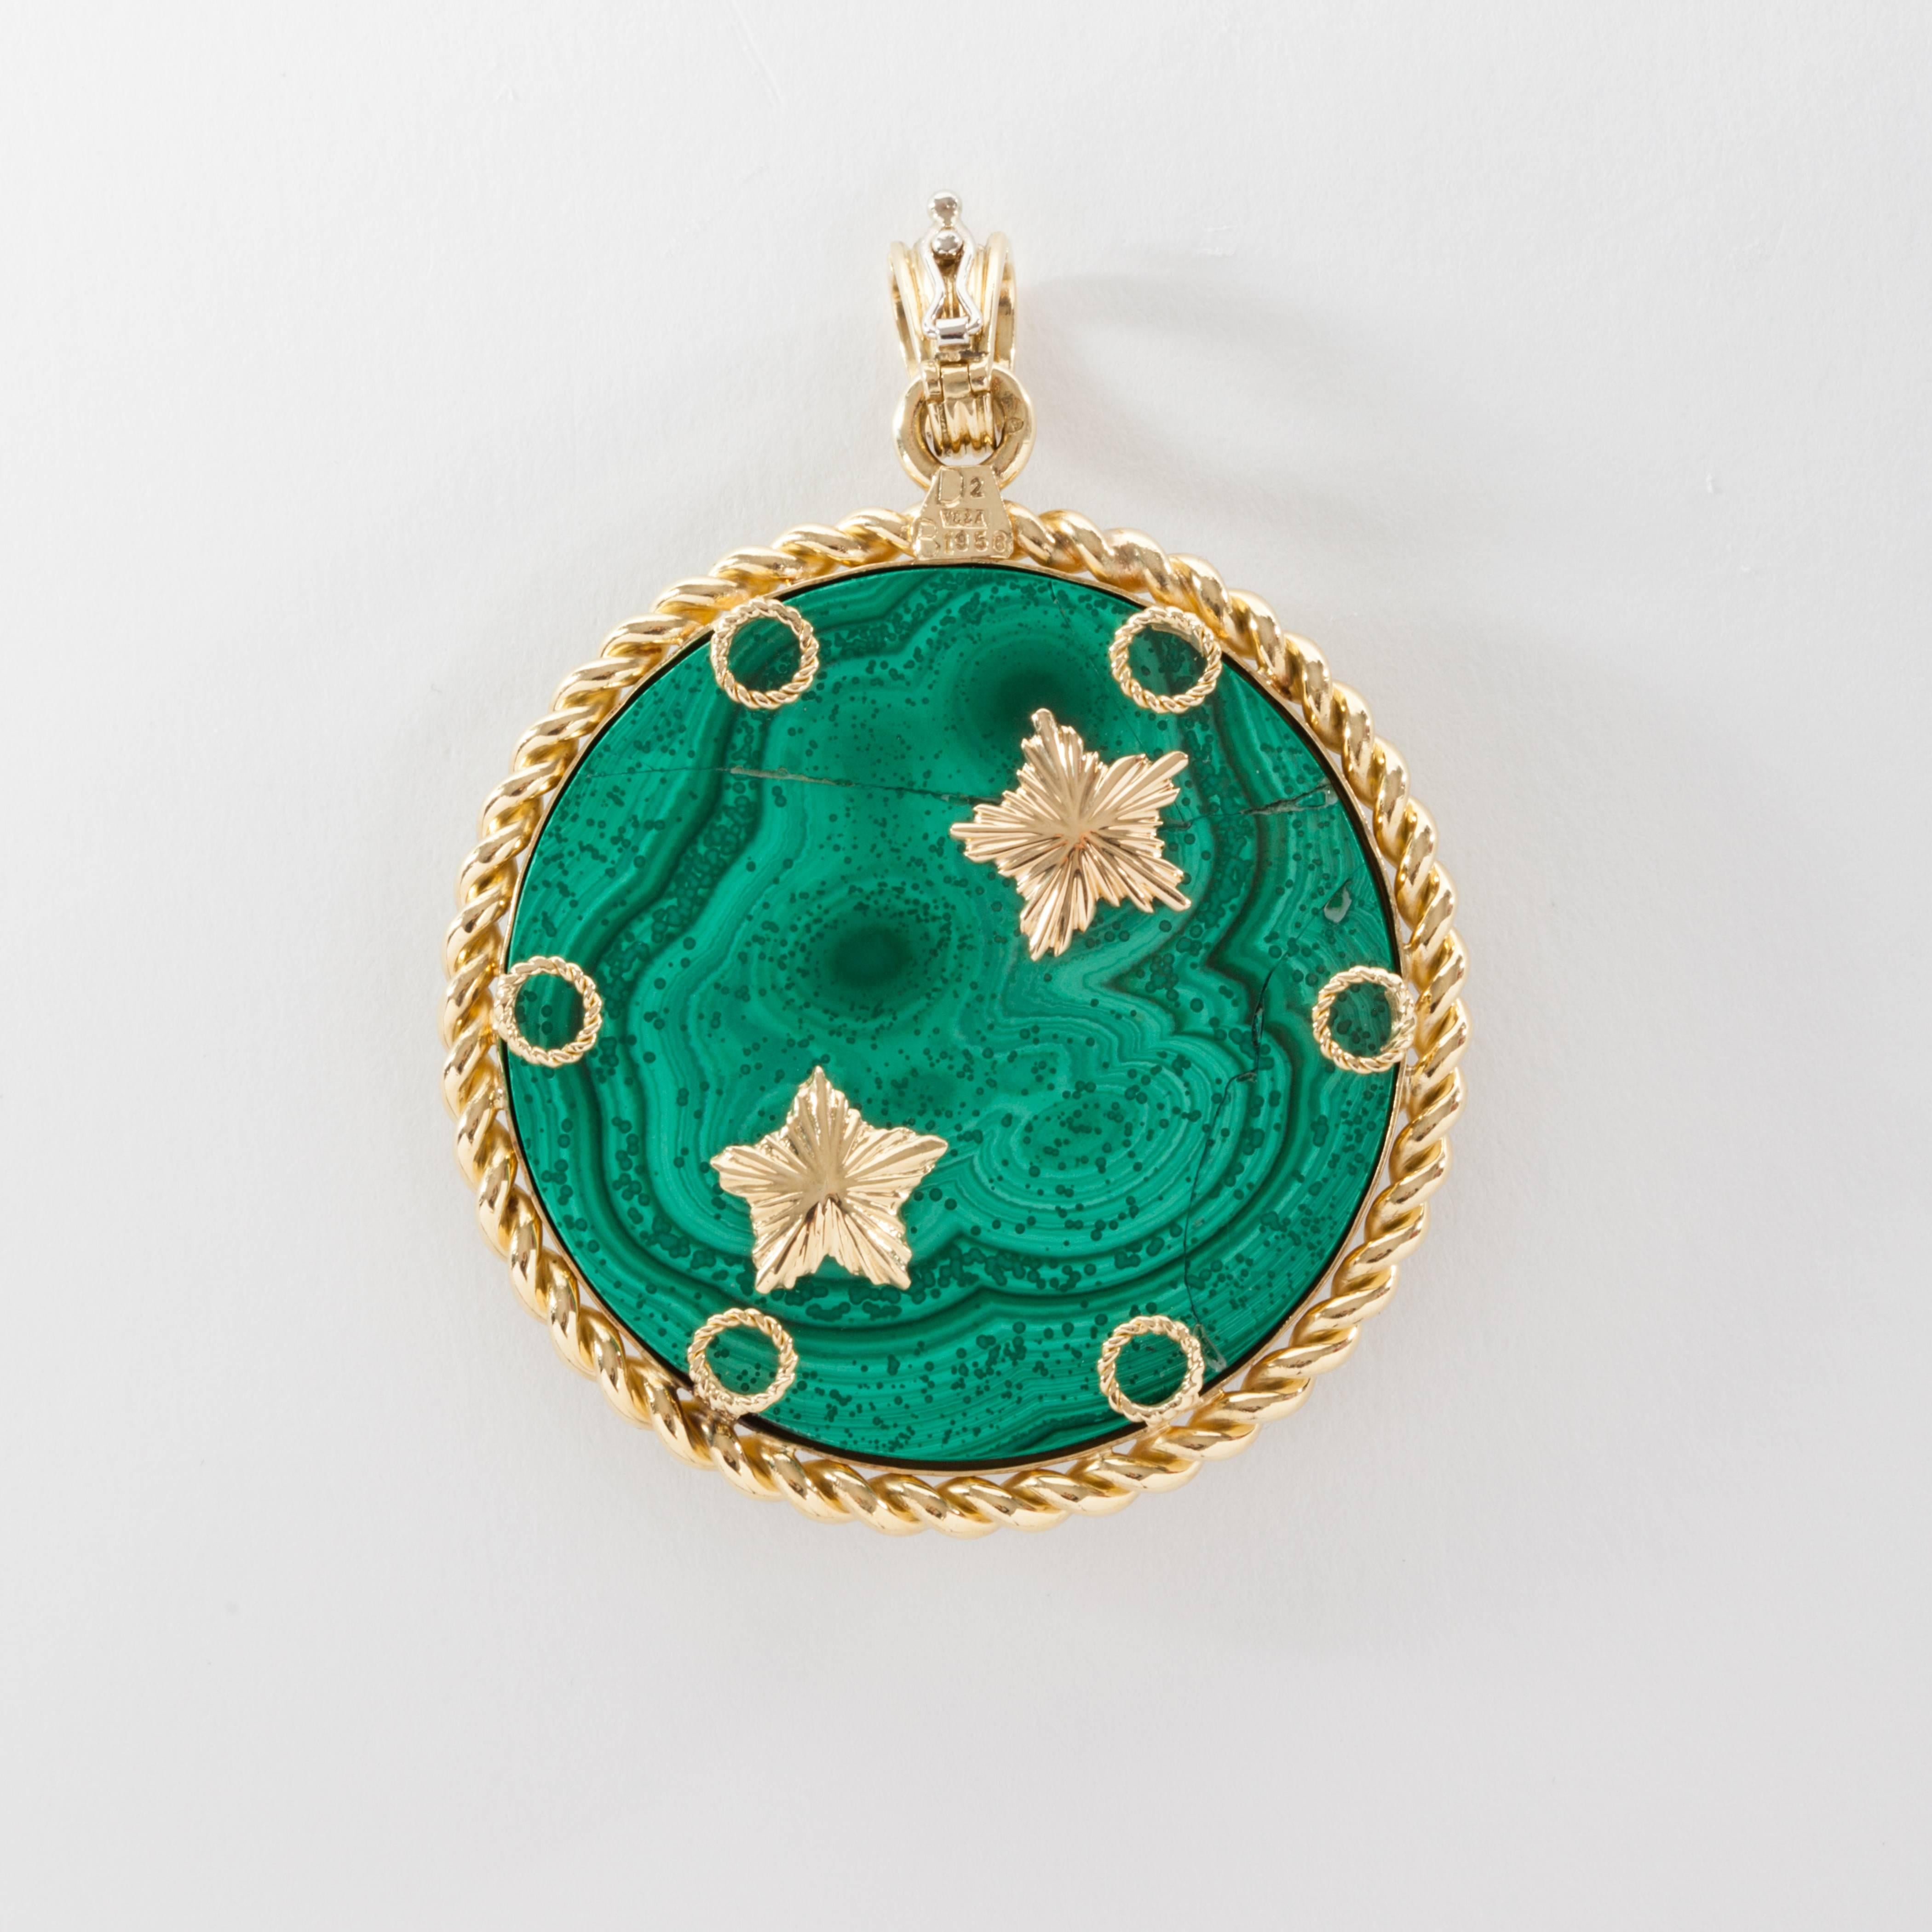 Van Cleef & Arpels 18K gold zodiac medallion. Aries sign on malachite, with one diamond on the star and one emerald eye. Two gold stars are fixed to the reverse side of the pendant. 

Signed VCA.
Circa 1970s